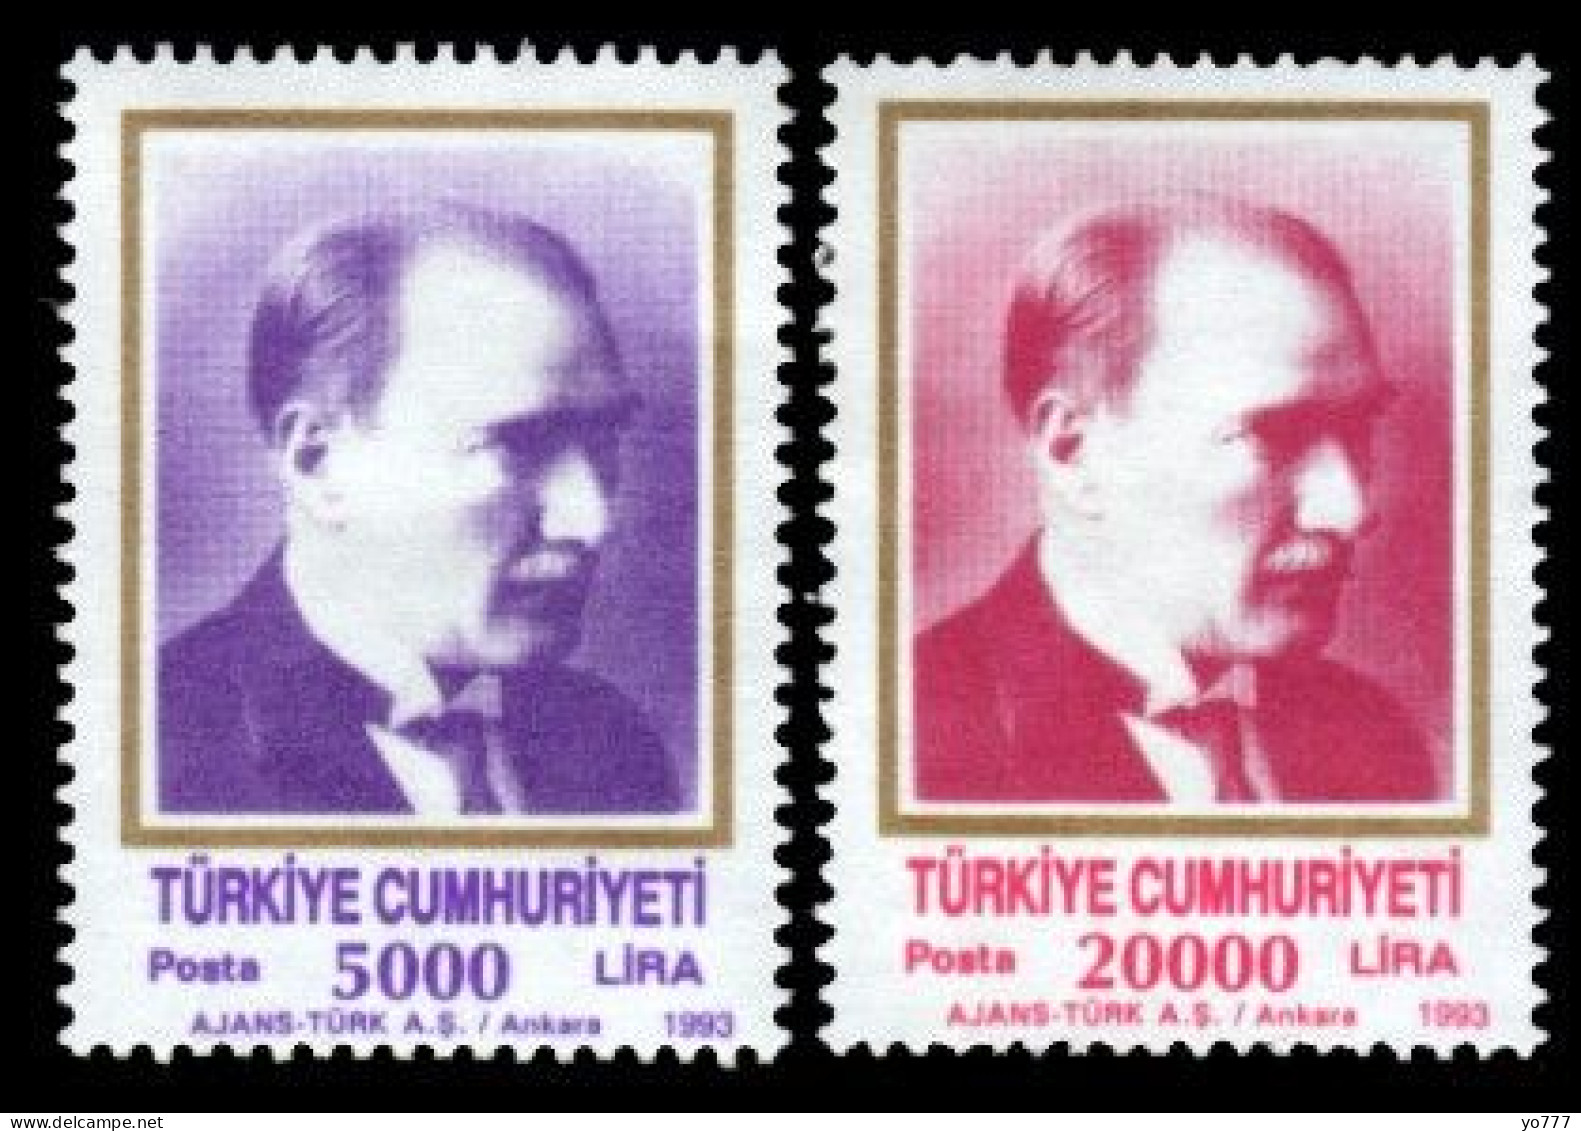 (3000-01) TURKEY REGULAR ISSUE STAMPS MNH** - Unused Stamps